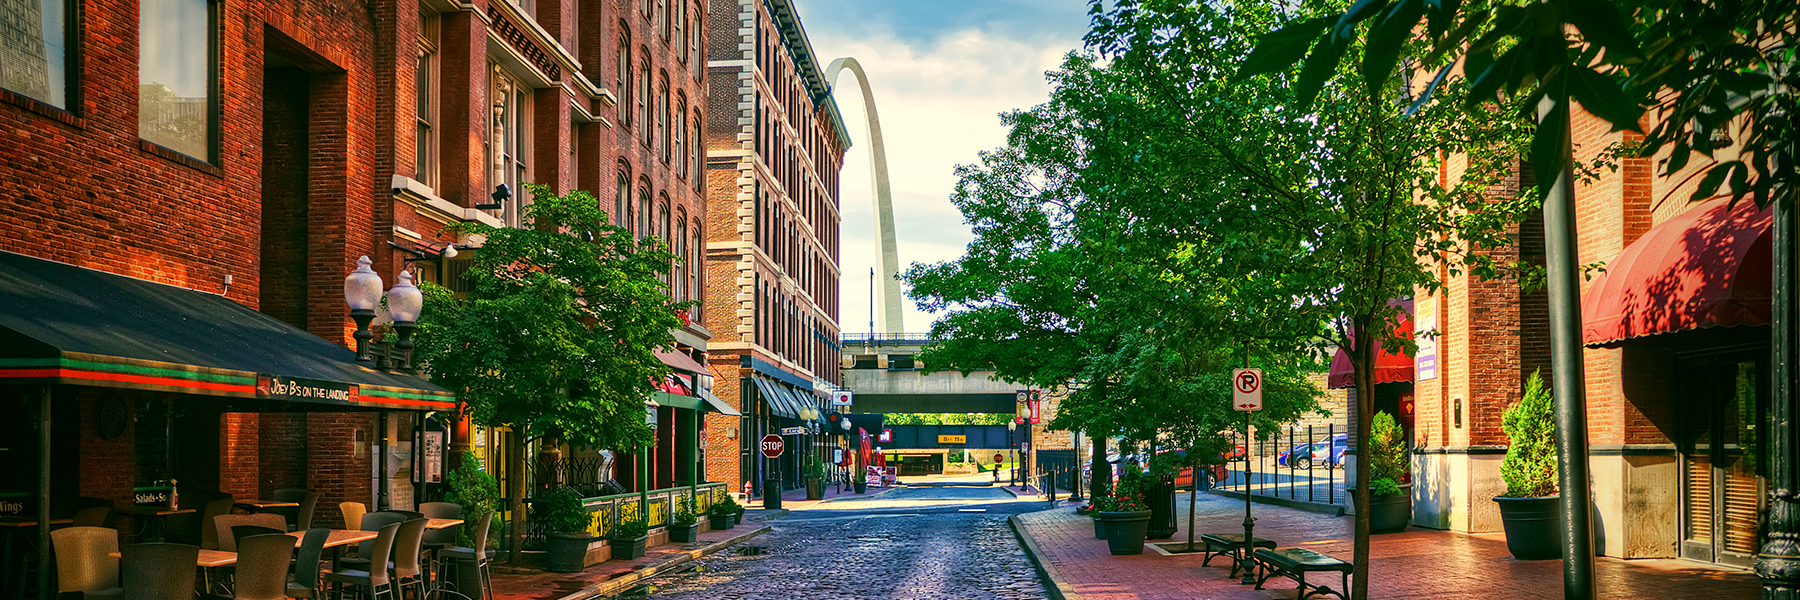 2 Days of French Sights In St Louis-Listed on the National Register of Historic Places, the cobblestone-paved Lacledes Landing sits on the banks of the the Mississippi River